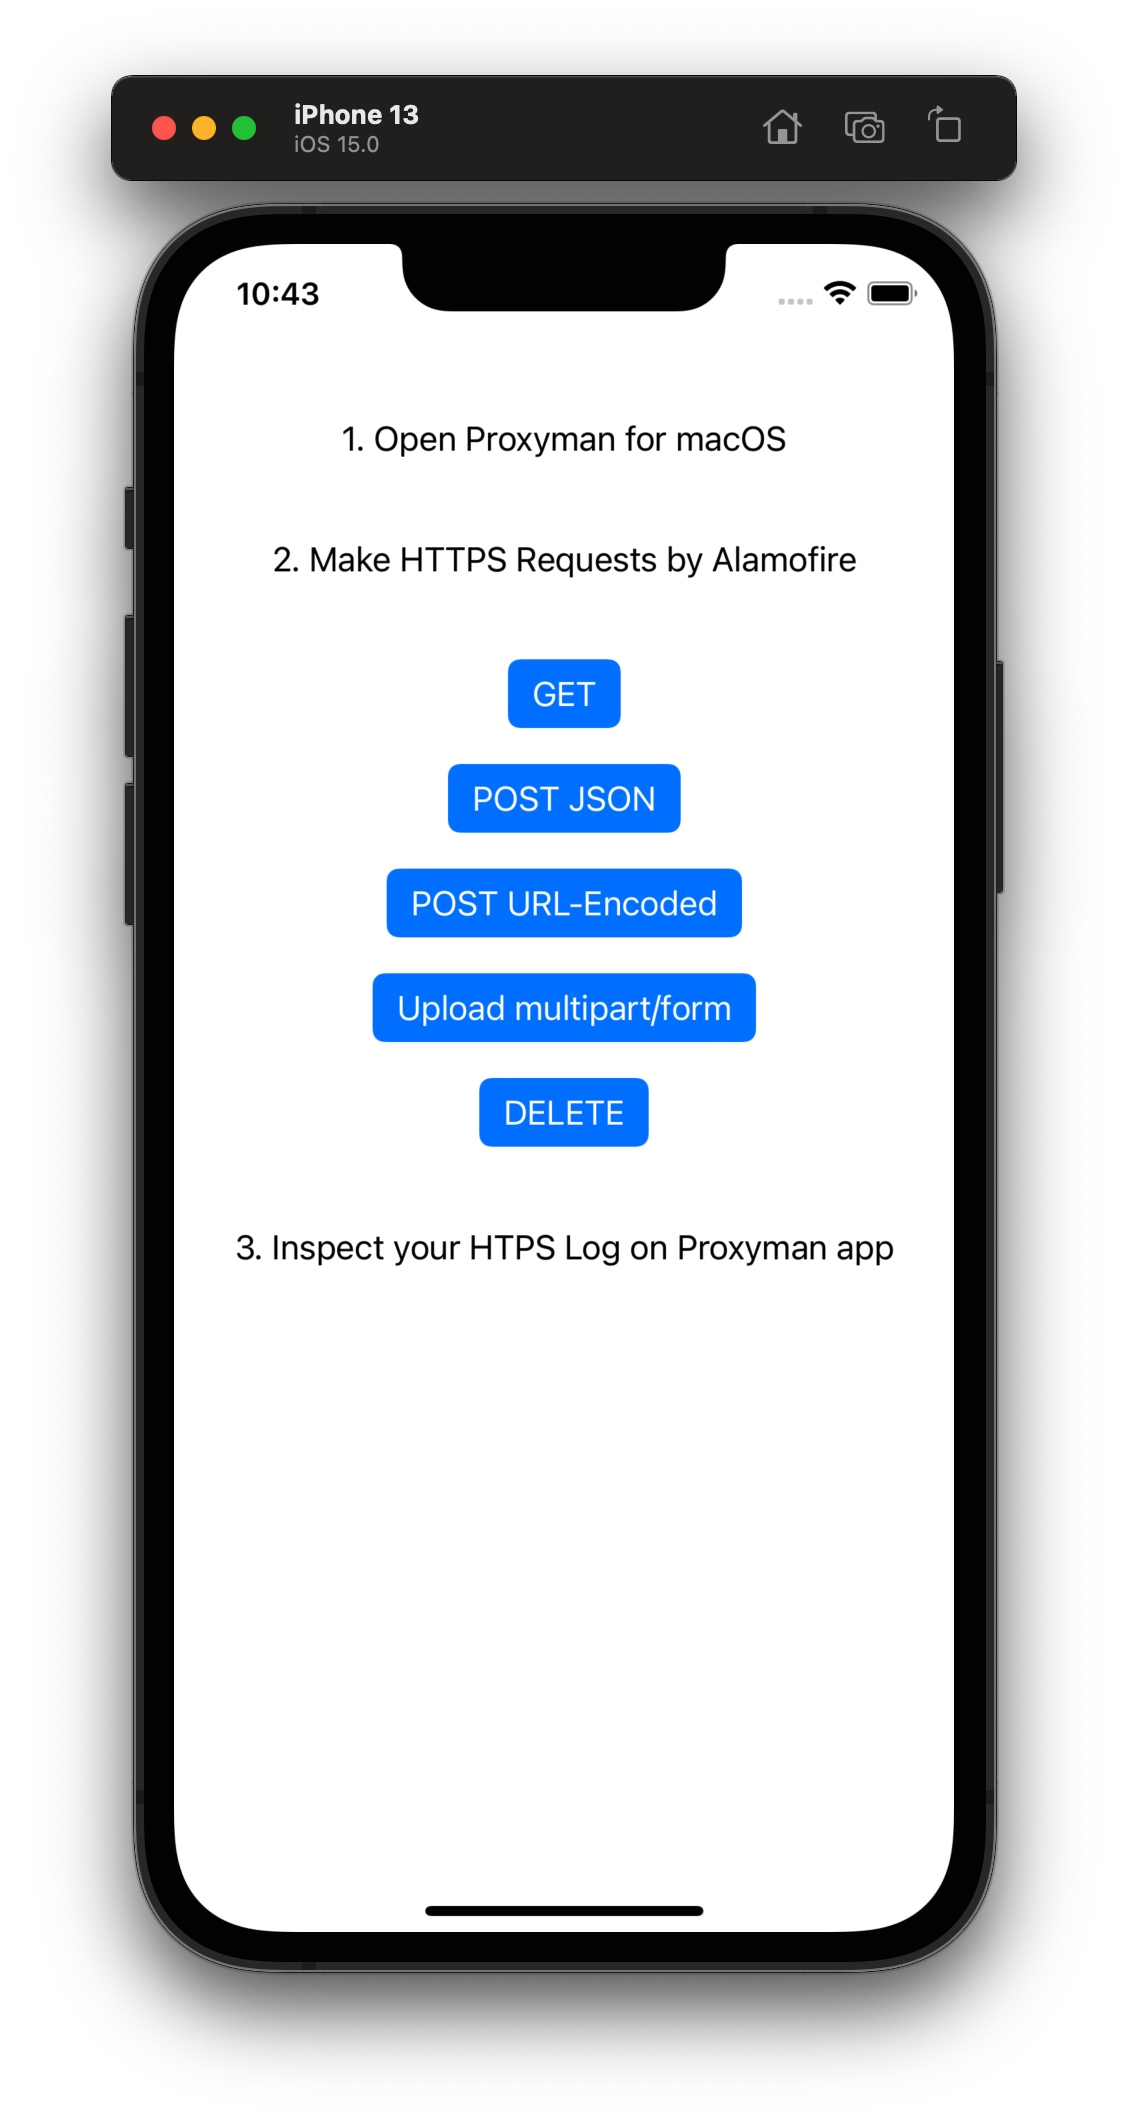 Atlantis: Capture HTTP/HTTPS traffic from iOS app without Proxy and Certificate with Proxyman